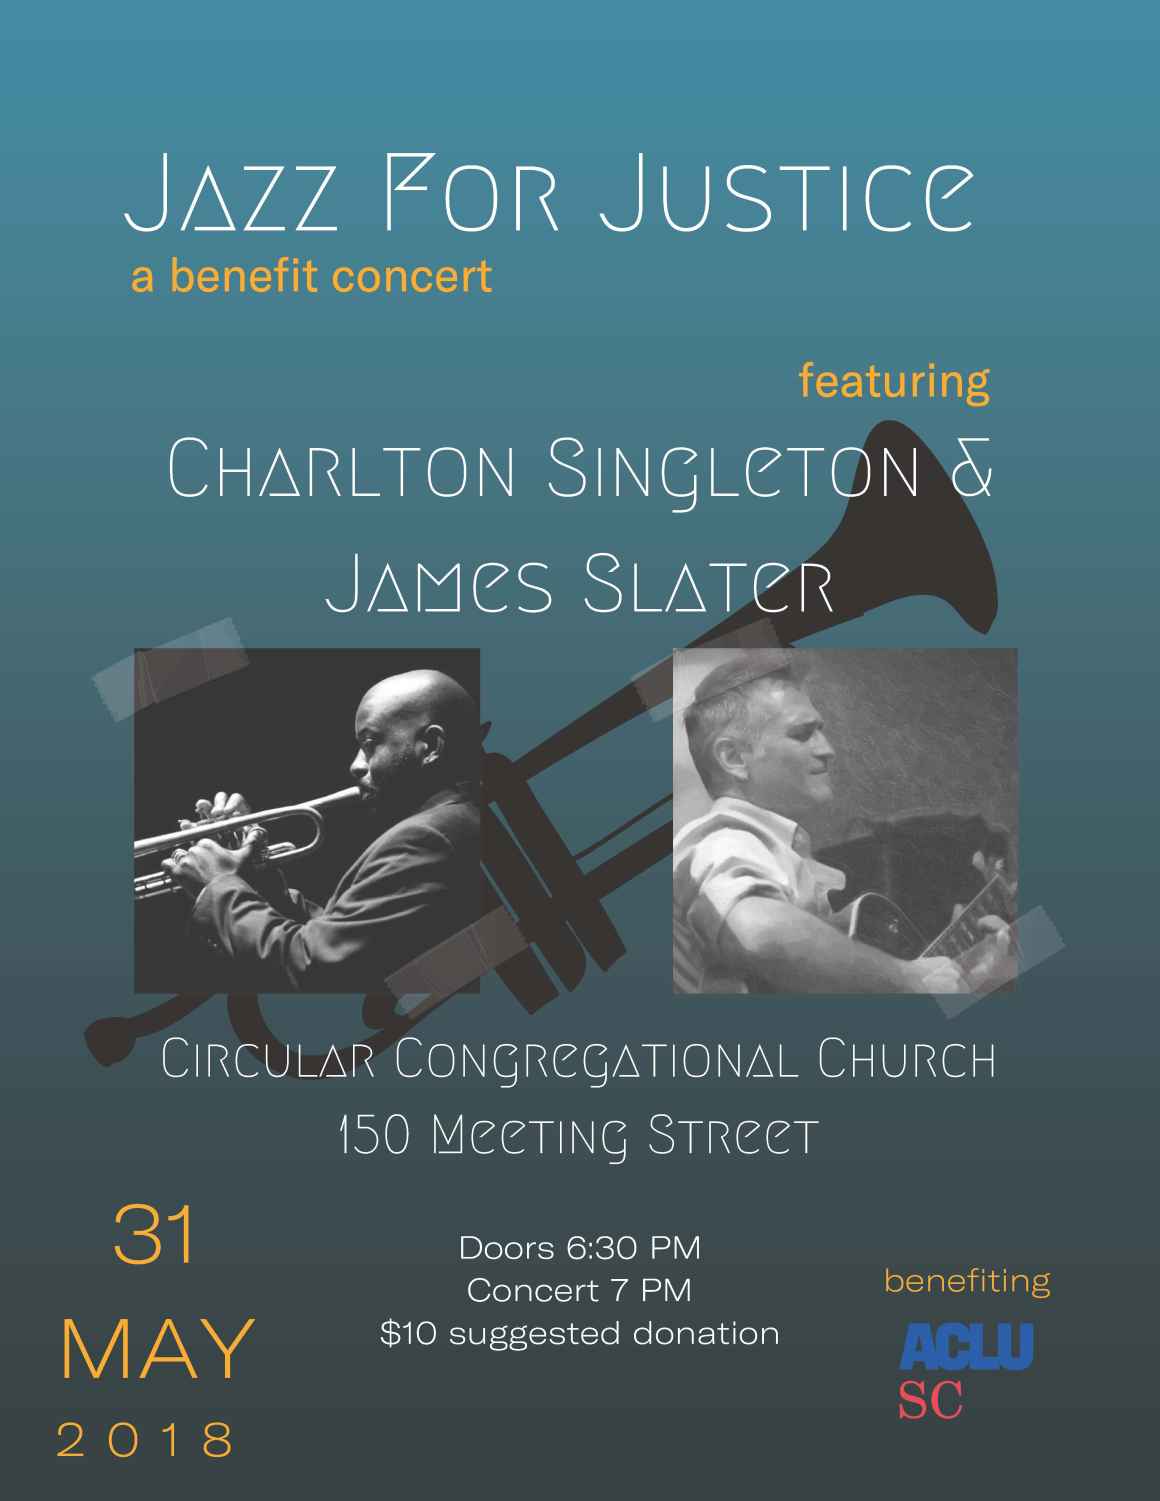 Jazz for Justice Benefit Concert for ACLU